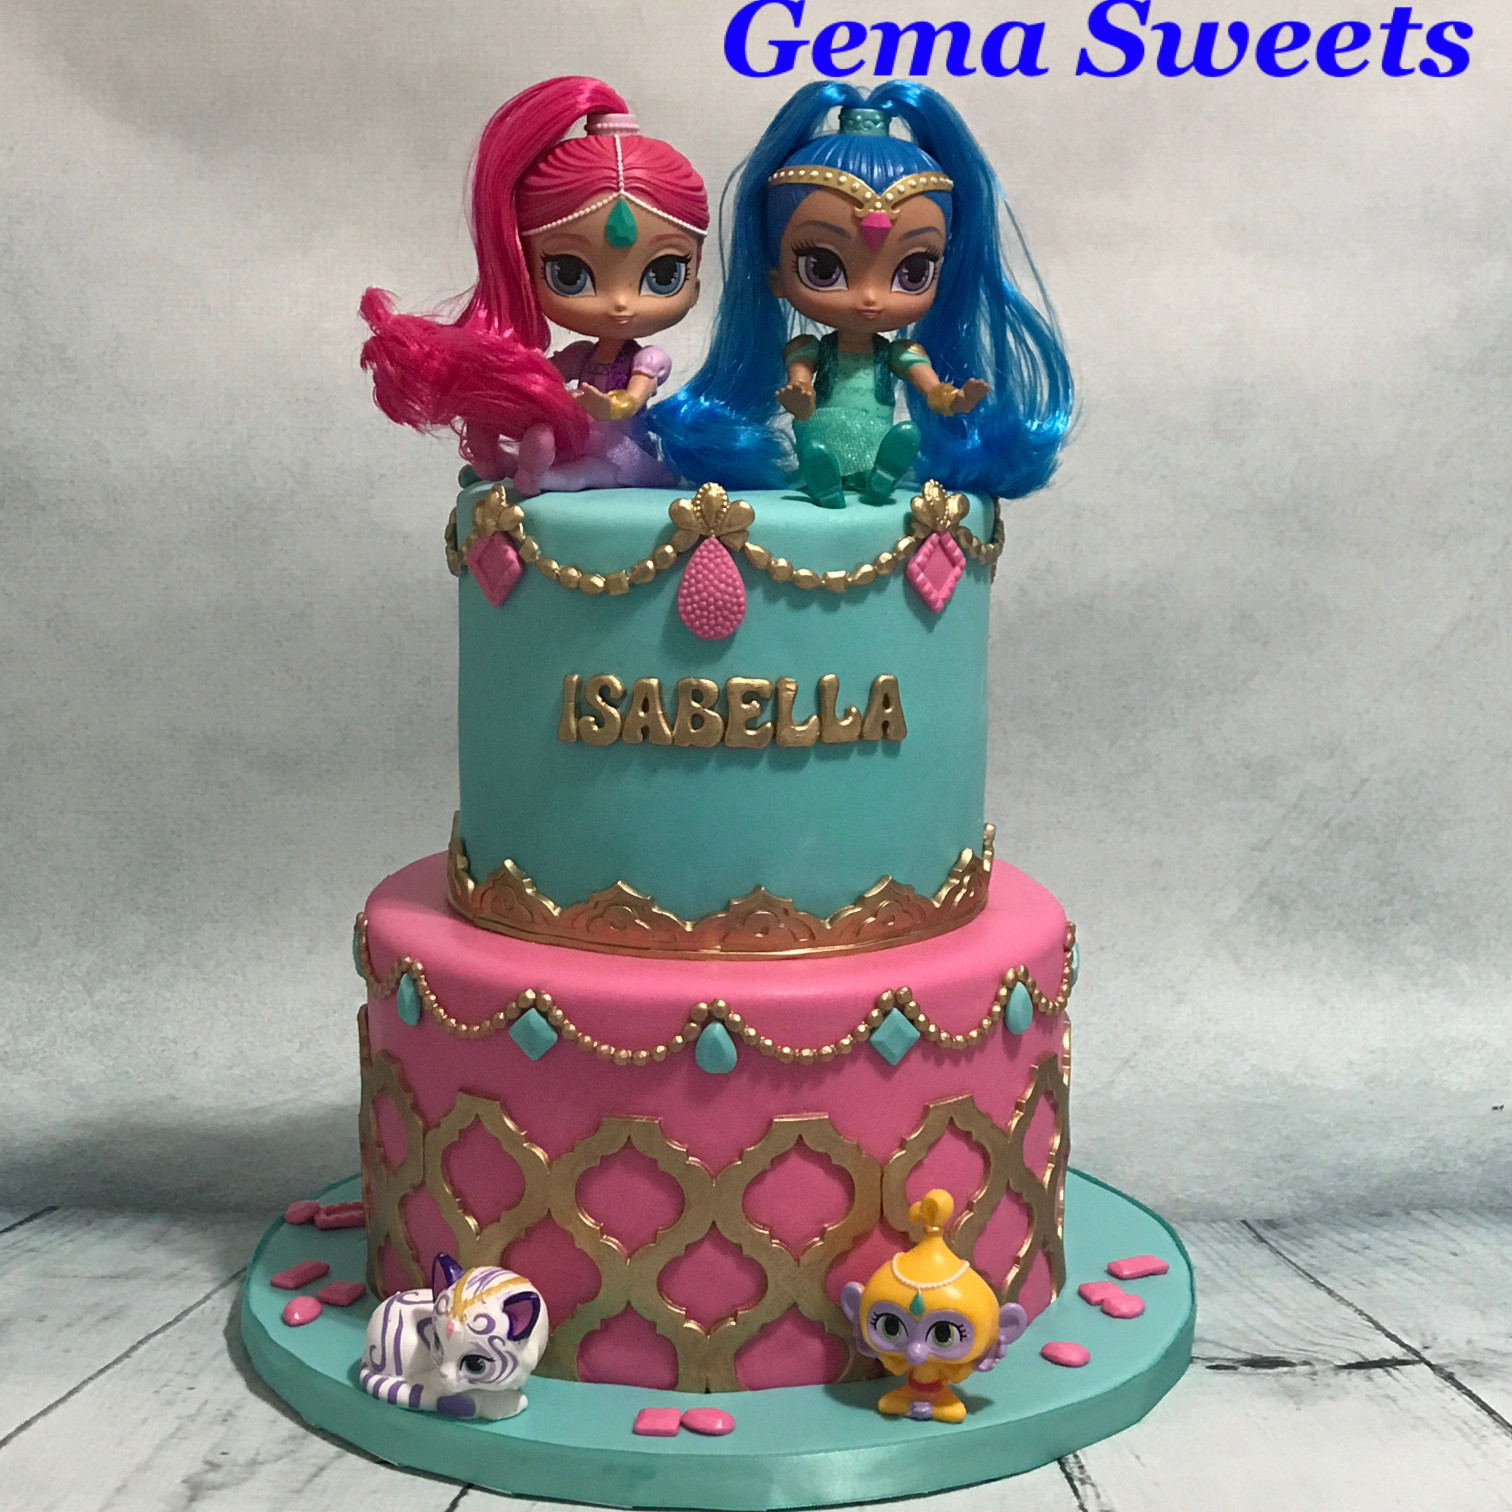 Shimmer And Shine Birthday Cake
 Shimmer and Shine inspired cake by Gema Sweets